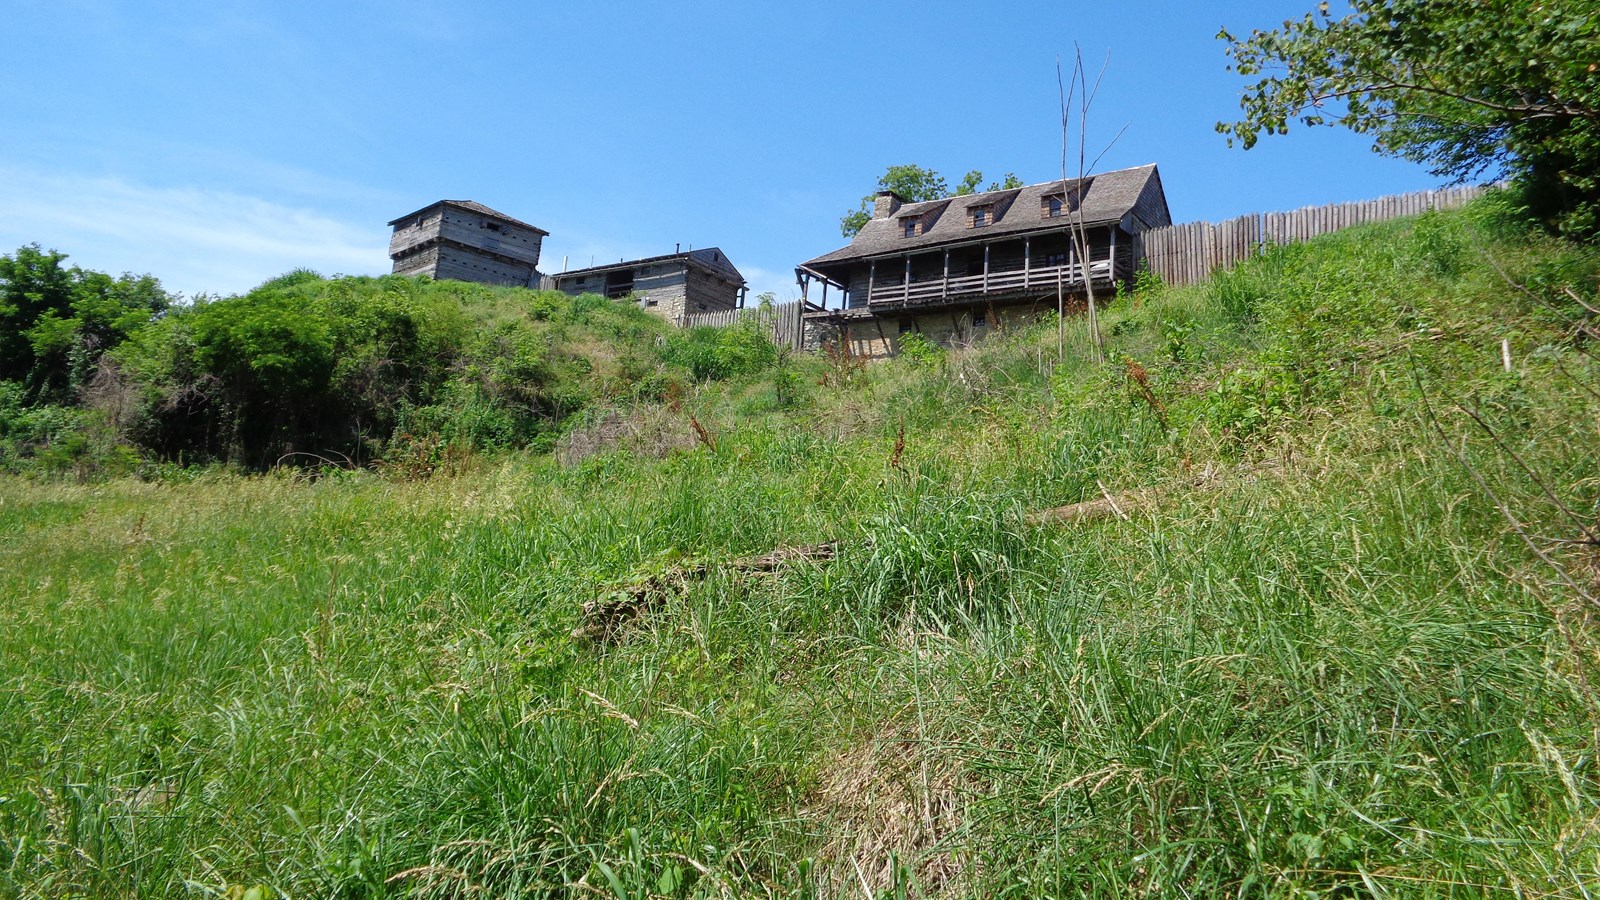 Large wooden buildings on top of a grassy hill